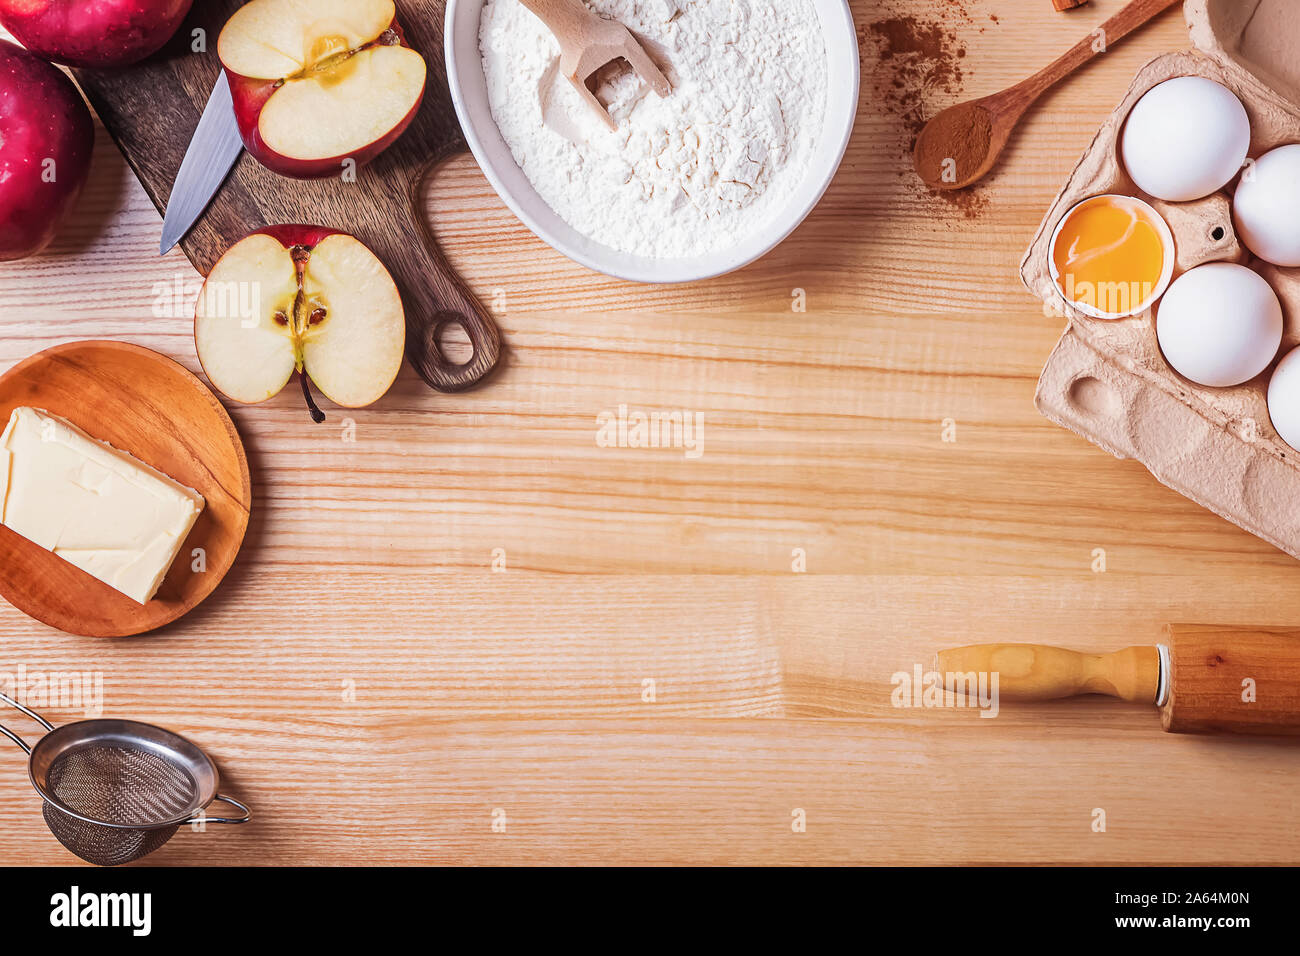 Ingredients for making apple pie on wooden table Stock Photo